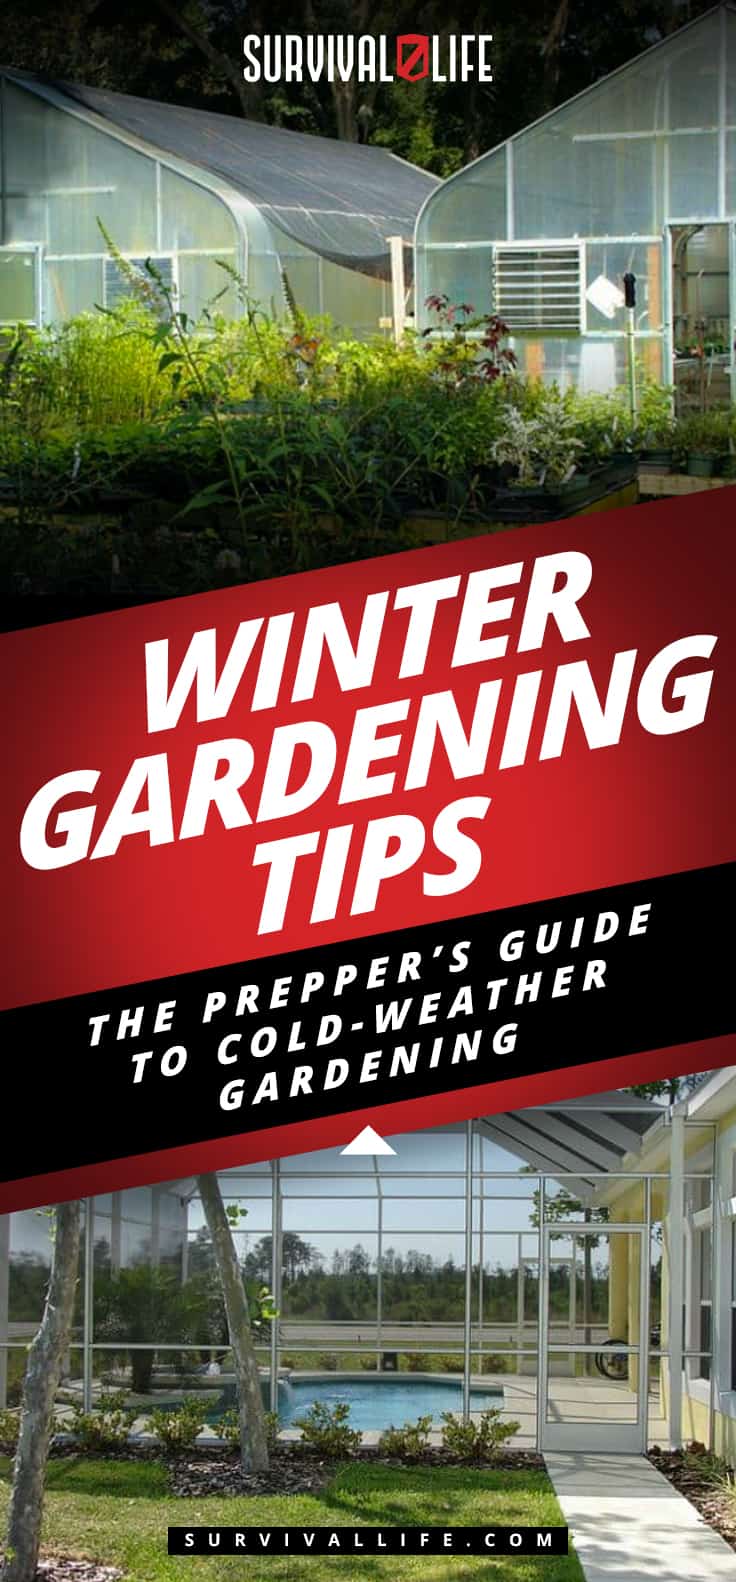 Placard | Winter Gardening Tips: The Prepper's Guide to Cold-Weather Gardening